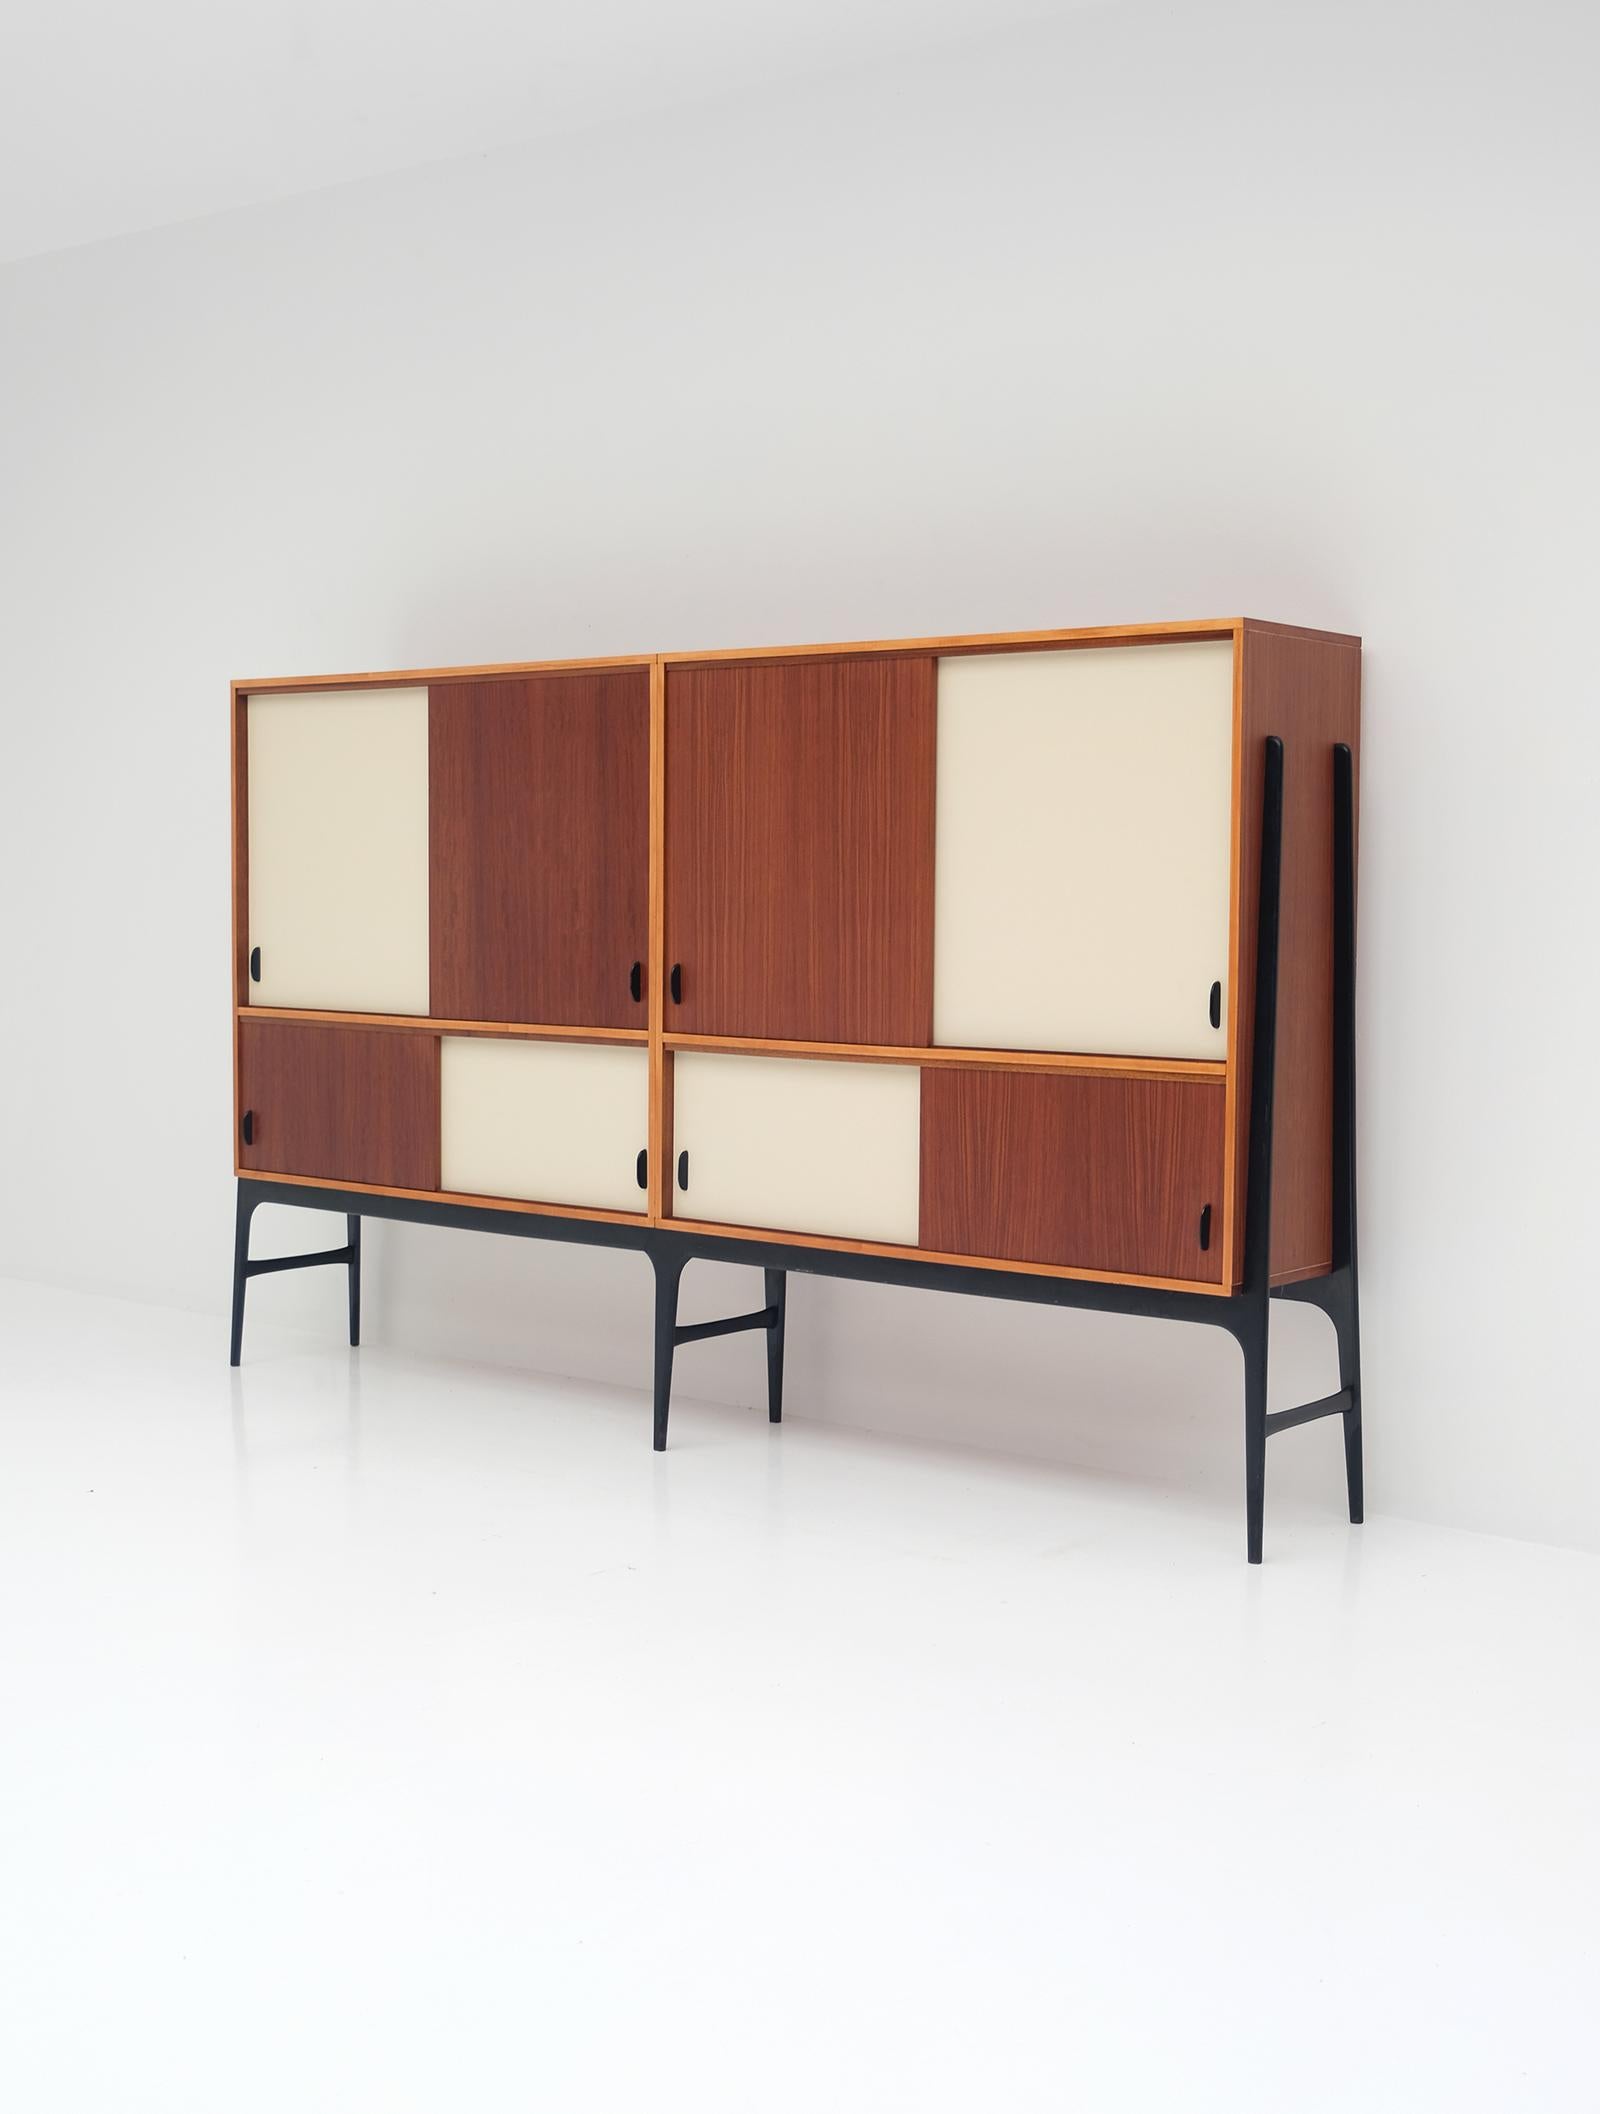 This exclusive sideboard was designed by Alfred Hendrickx for Belform in the late 50s during EXPO 58. The bigger part consists out of 2 pieces, the black lacquered base is made out of one piece. Inside there is a lot of storage space due the many